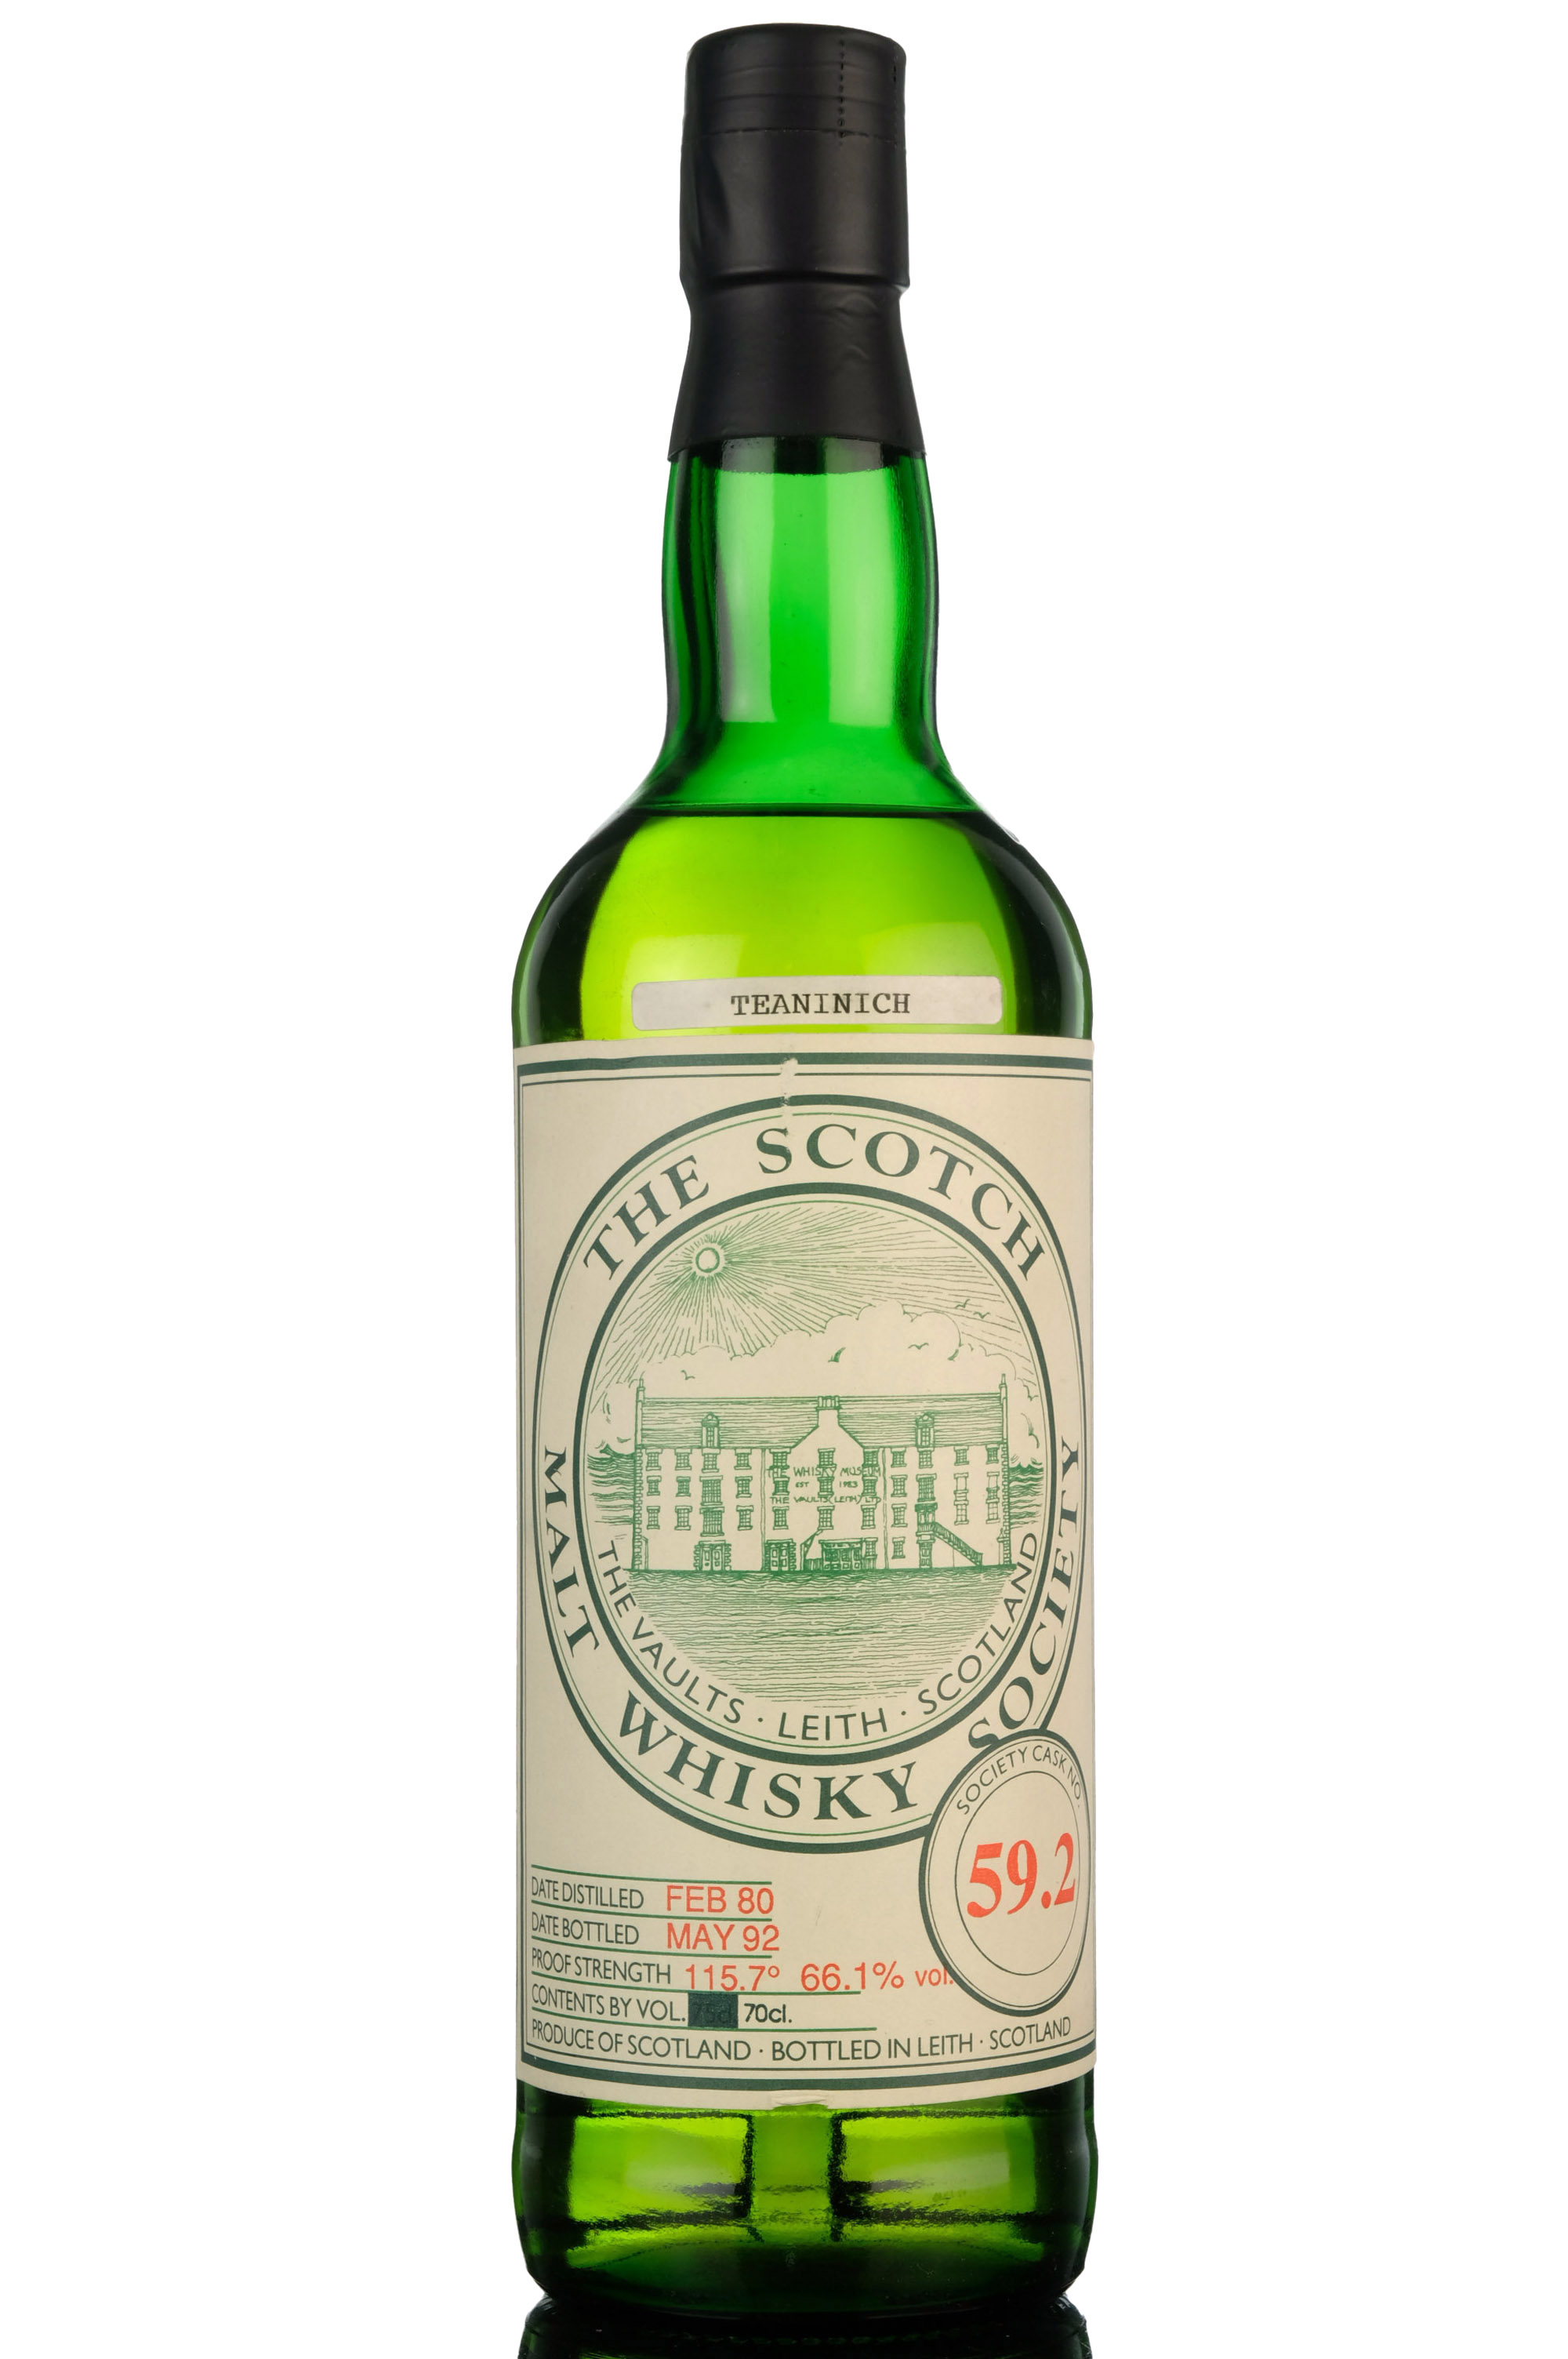 Teaninich 1980-1992 - 12 Year Old - SMWS 59.2